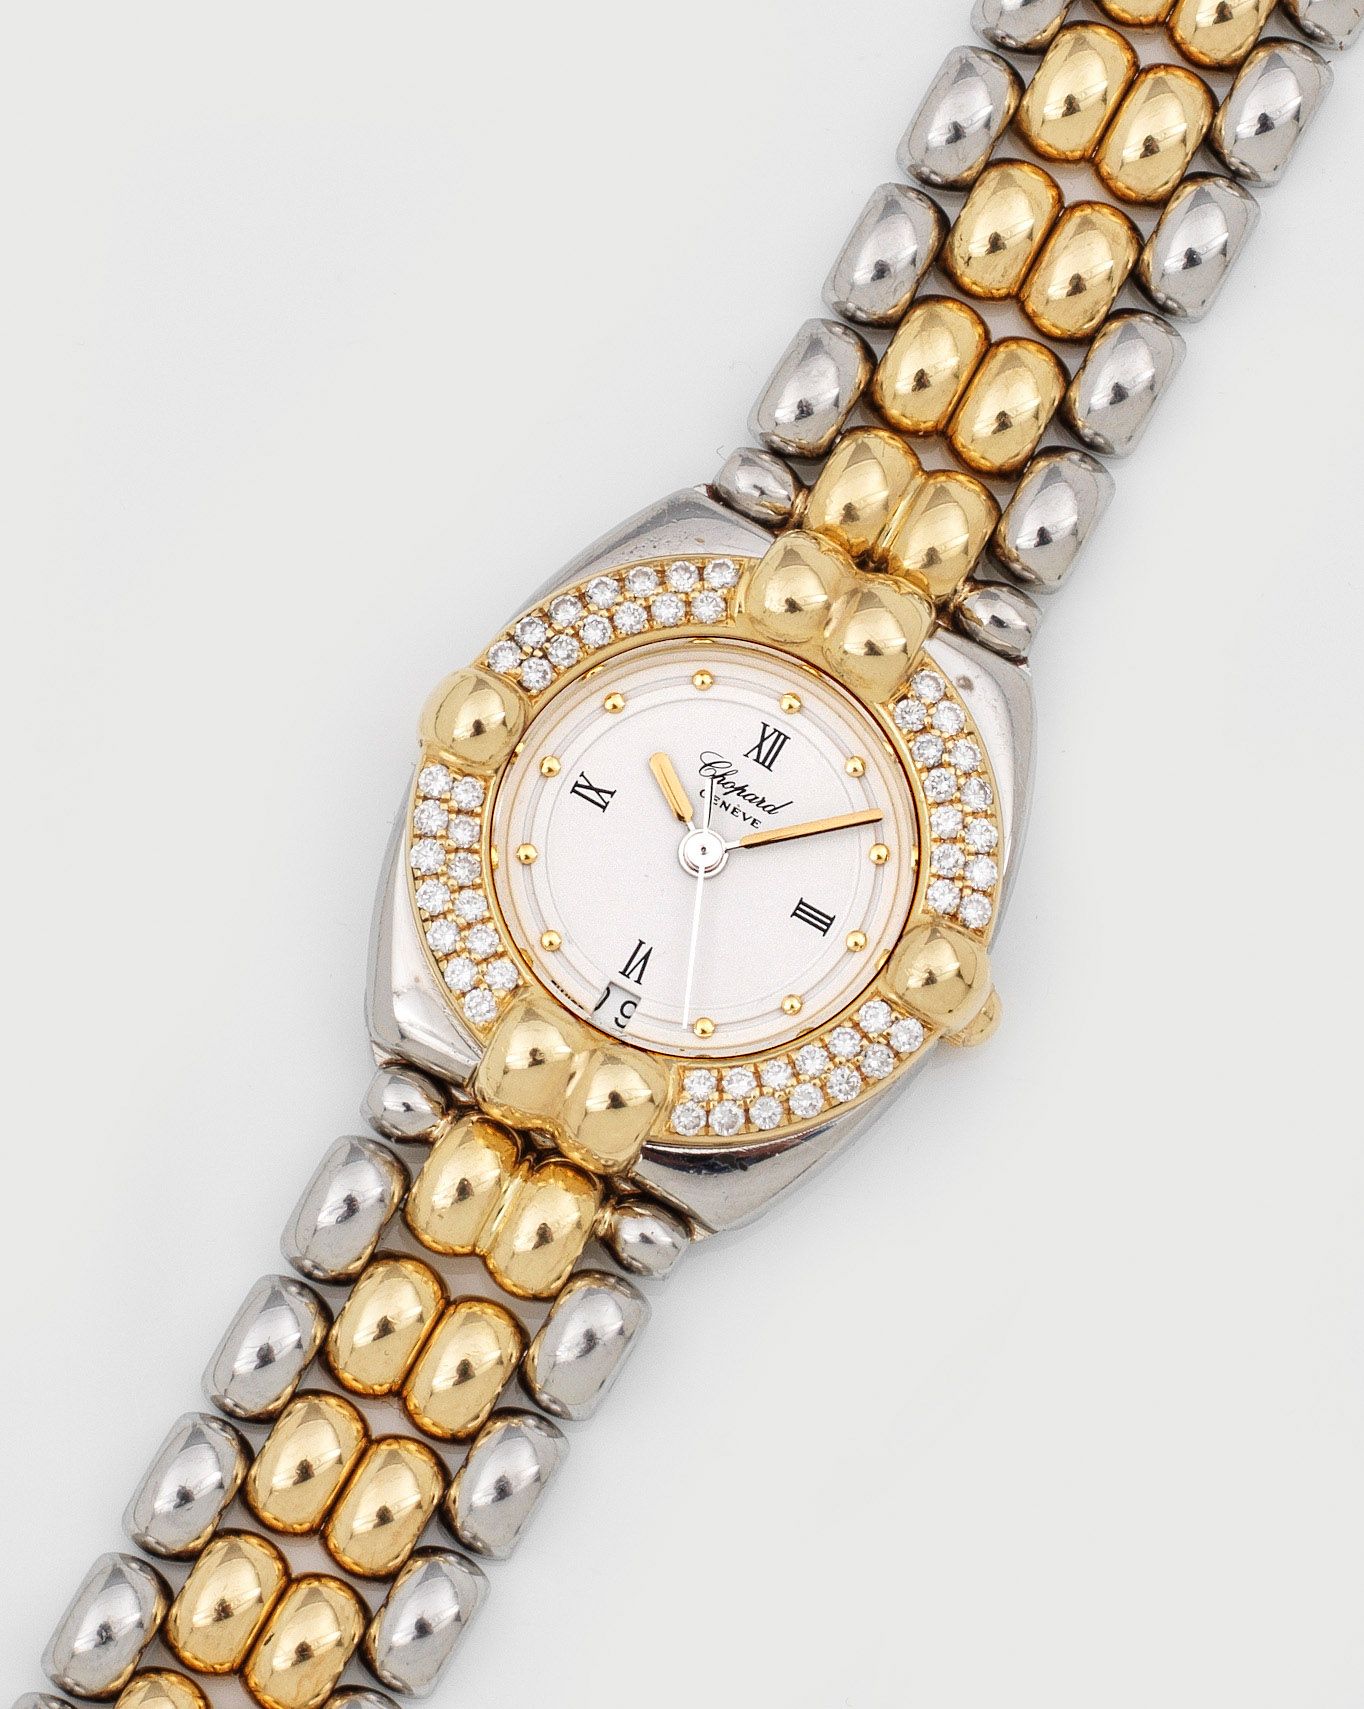 Null Ladies' wristwatch by Chopard-"Gstaad" steel and yellow gold, 18 ct; tonnea&hellip;